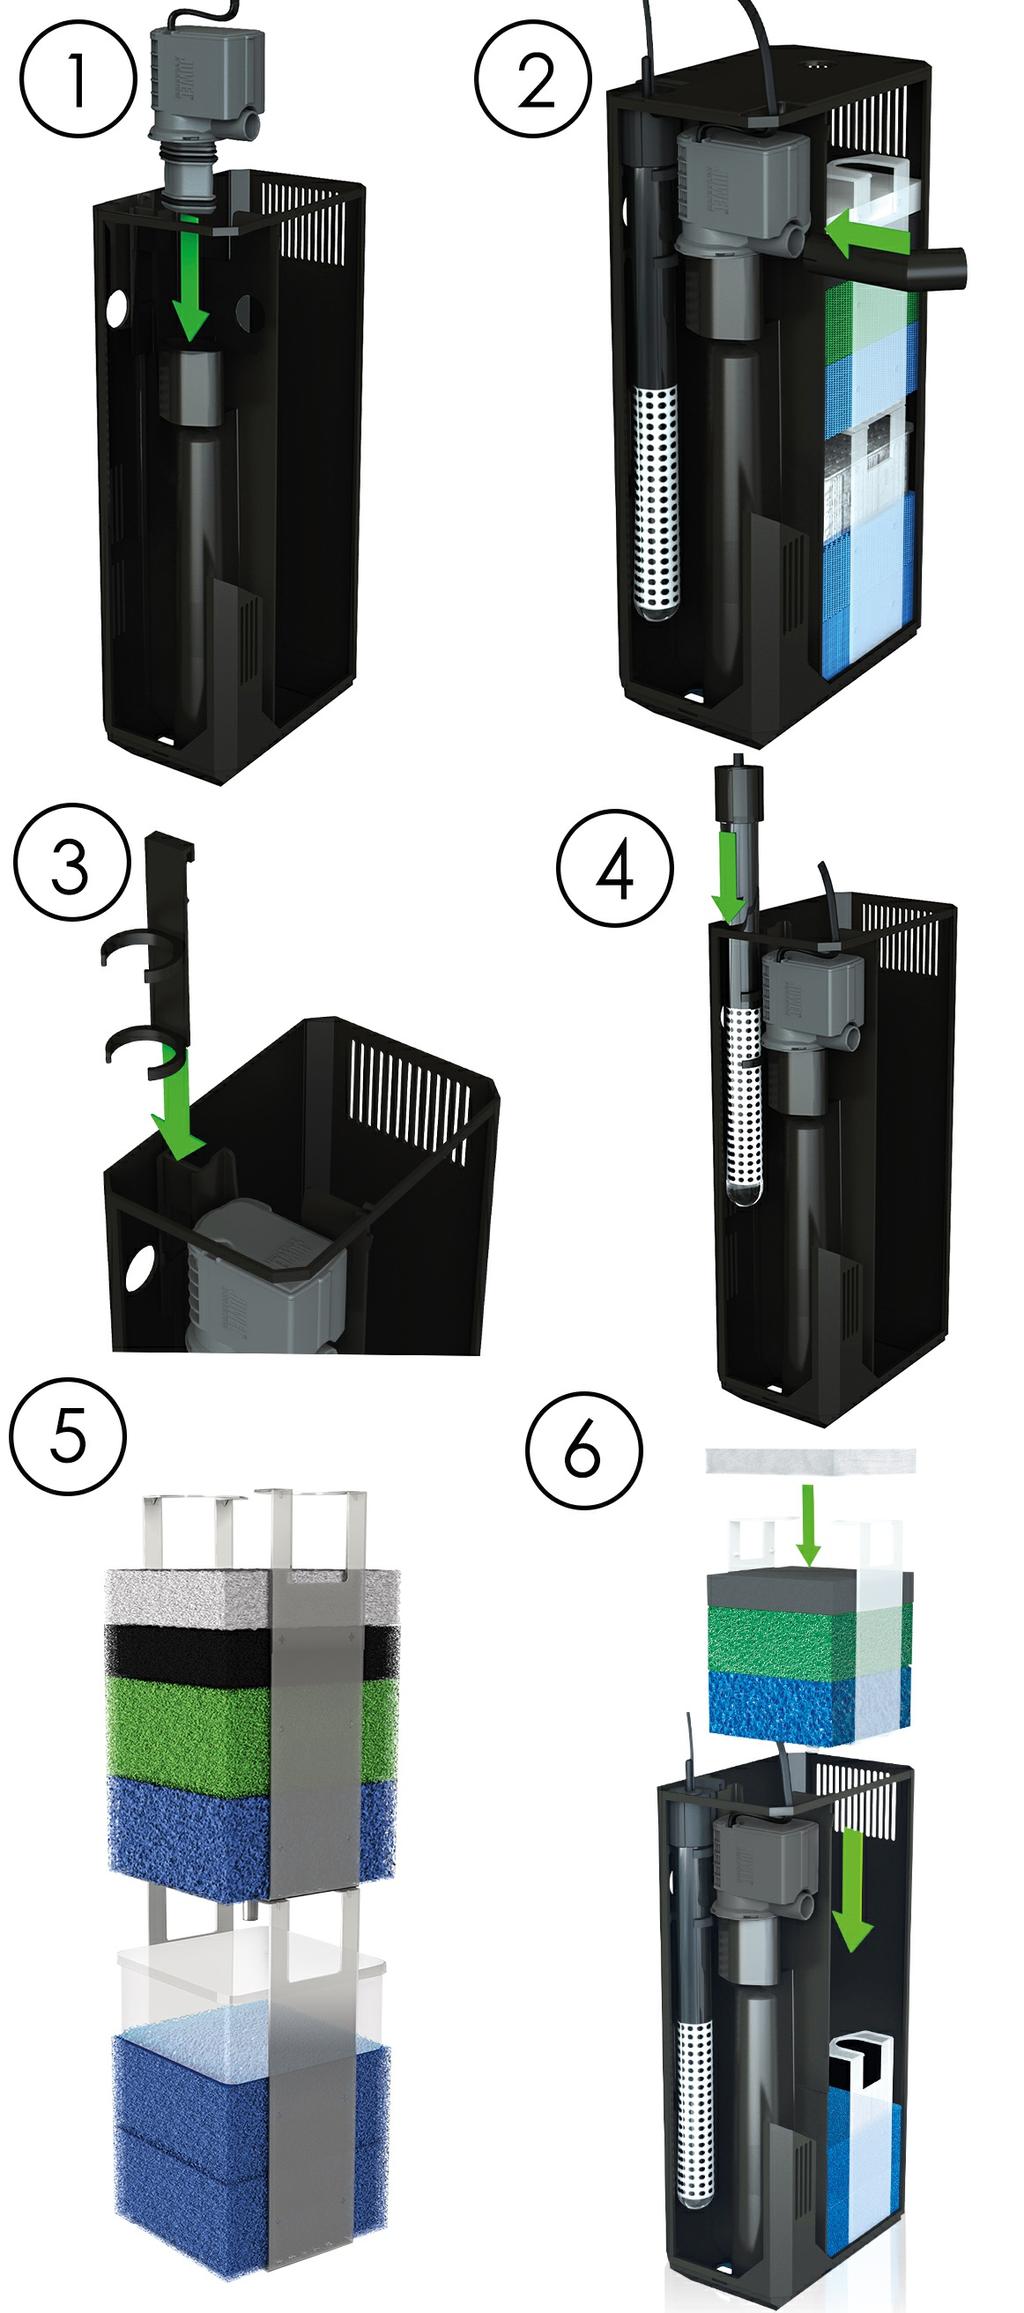 Getting Started - The JUWEL filter system Bioflow M/3.0, L/6.0 and XL/8.0 You should prepare the filter for operation prior to setting up the aquarium.